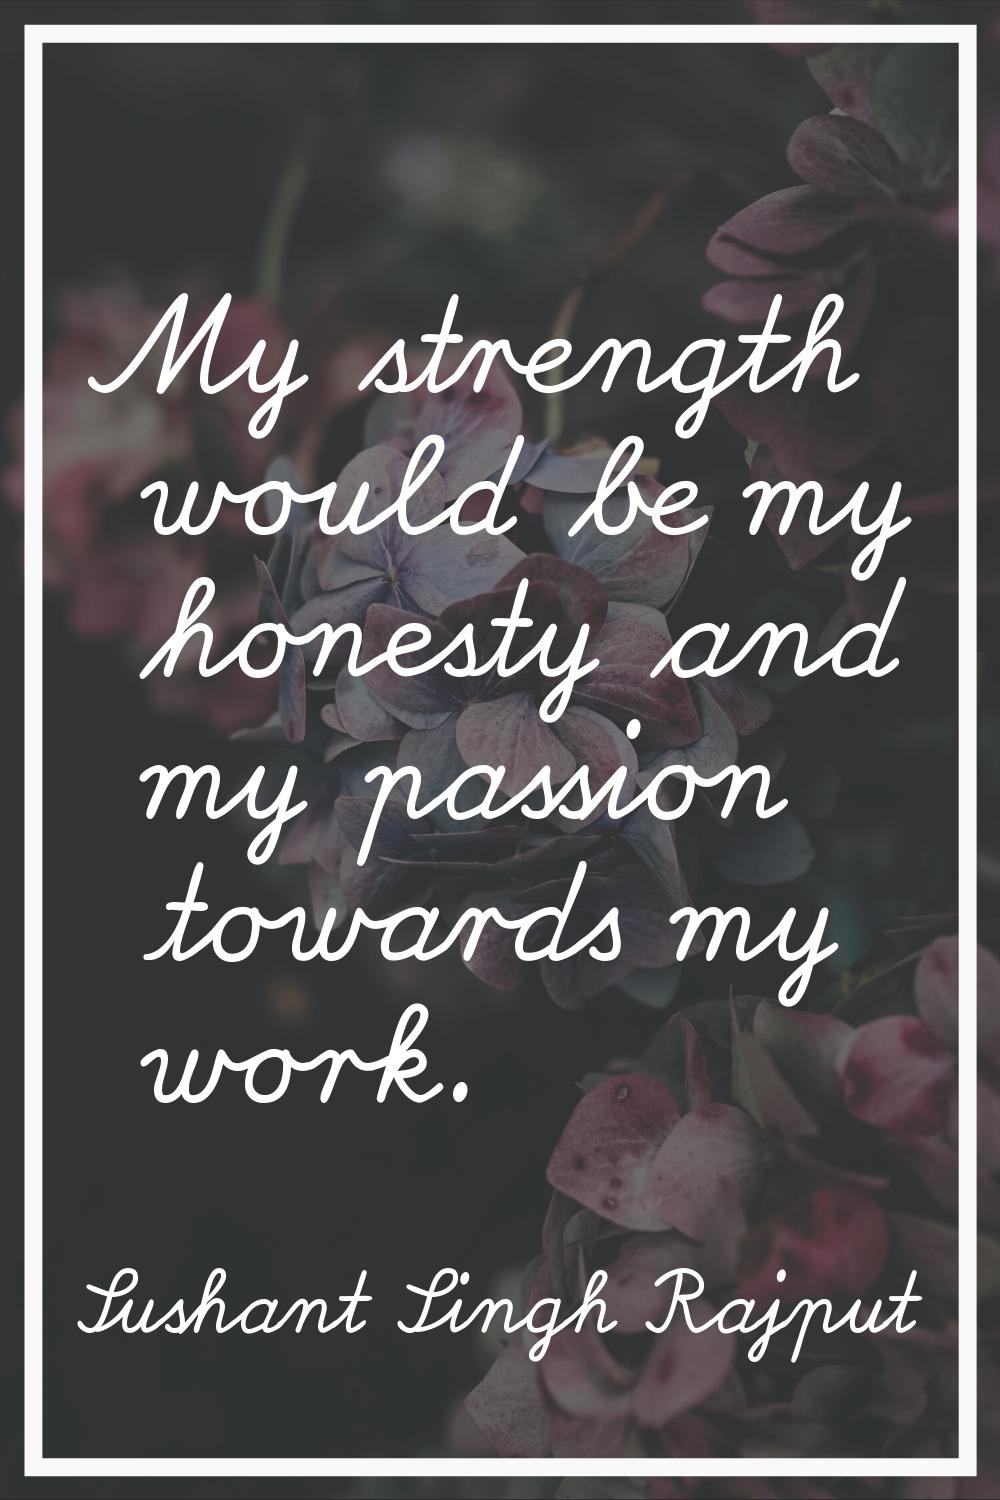 My strength would be my honesty and my passion towards my work.